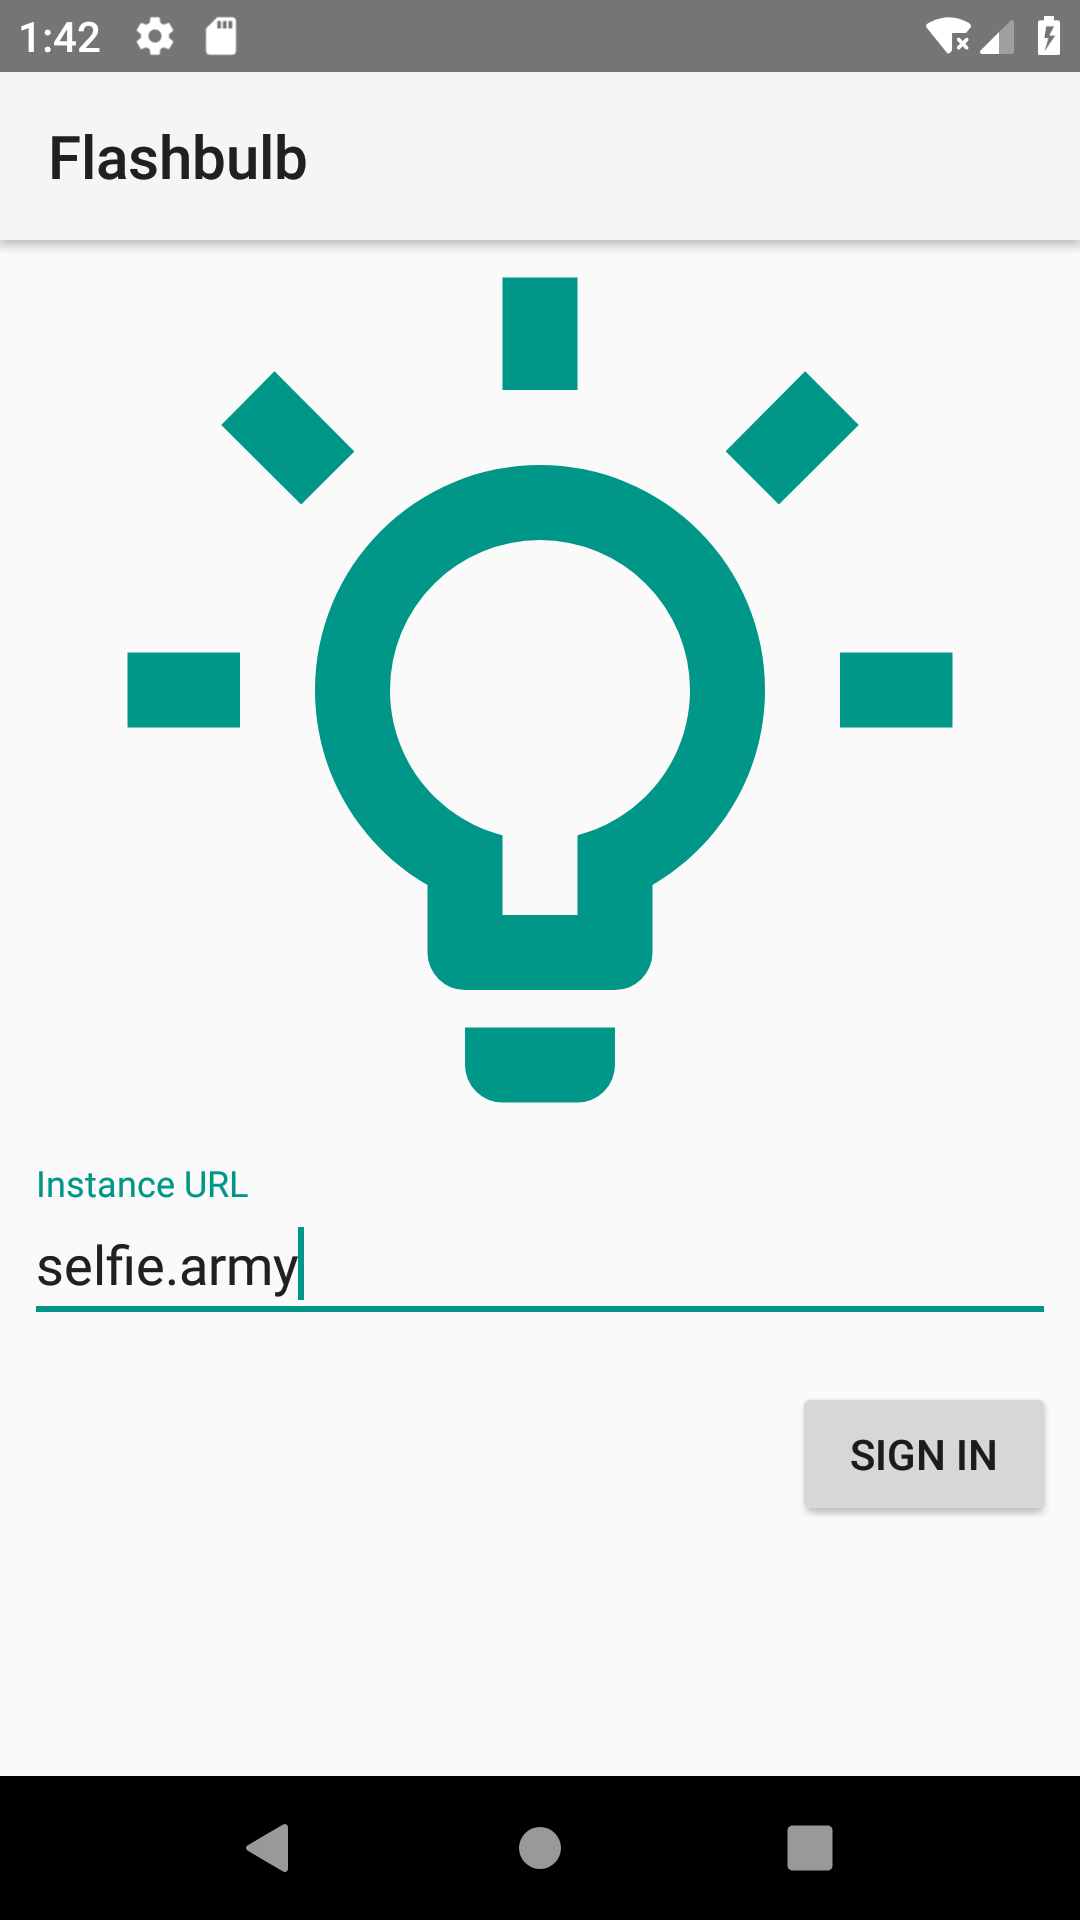 
          Screenshot of an Android app. 'Flashbulb' in the app bar name.
          A lightbulb logo before a text field named 'Instance URL'.
          The text 'selfie.army' is filled in.
          A sign in button after the text field.
          